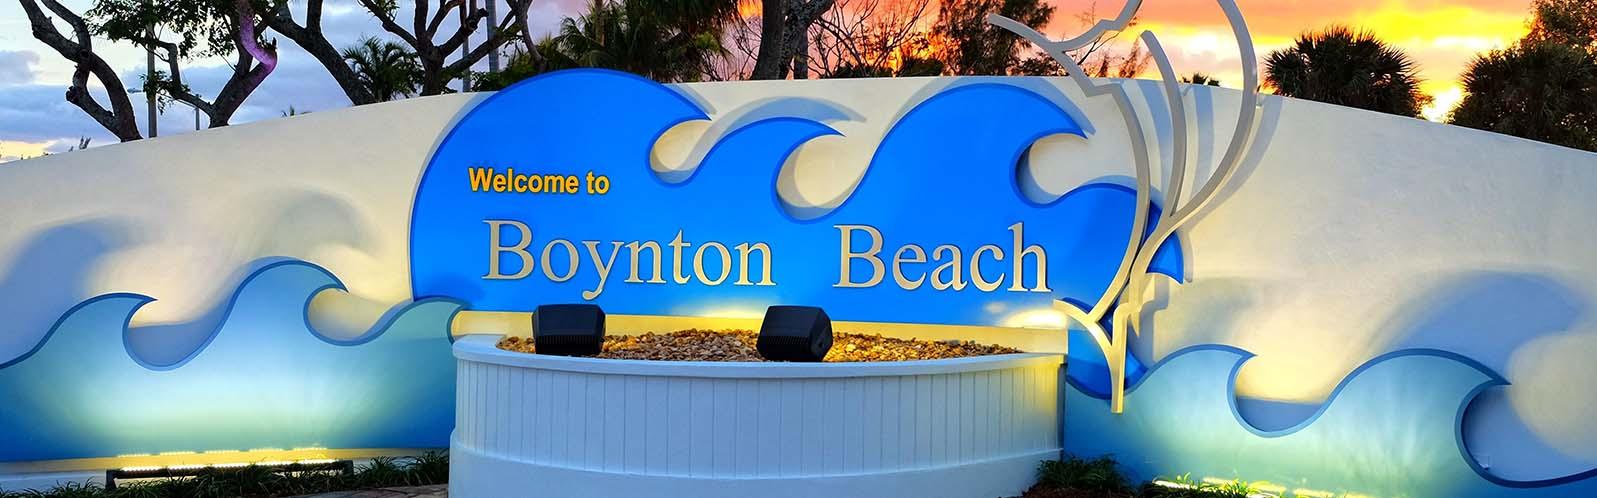 NEW: Boynton getting 18 new townhomes on Federal Highway; some residents not happy